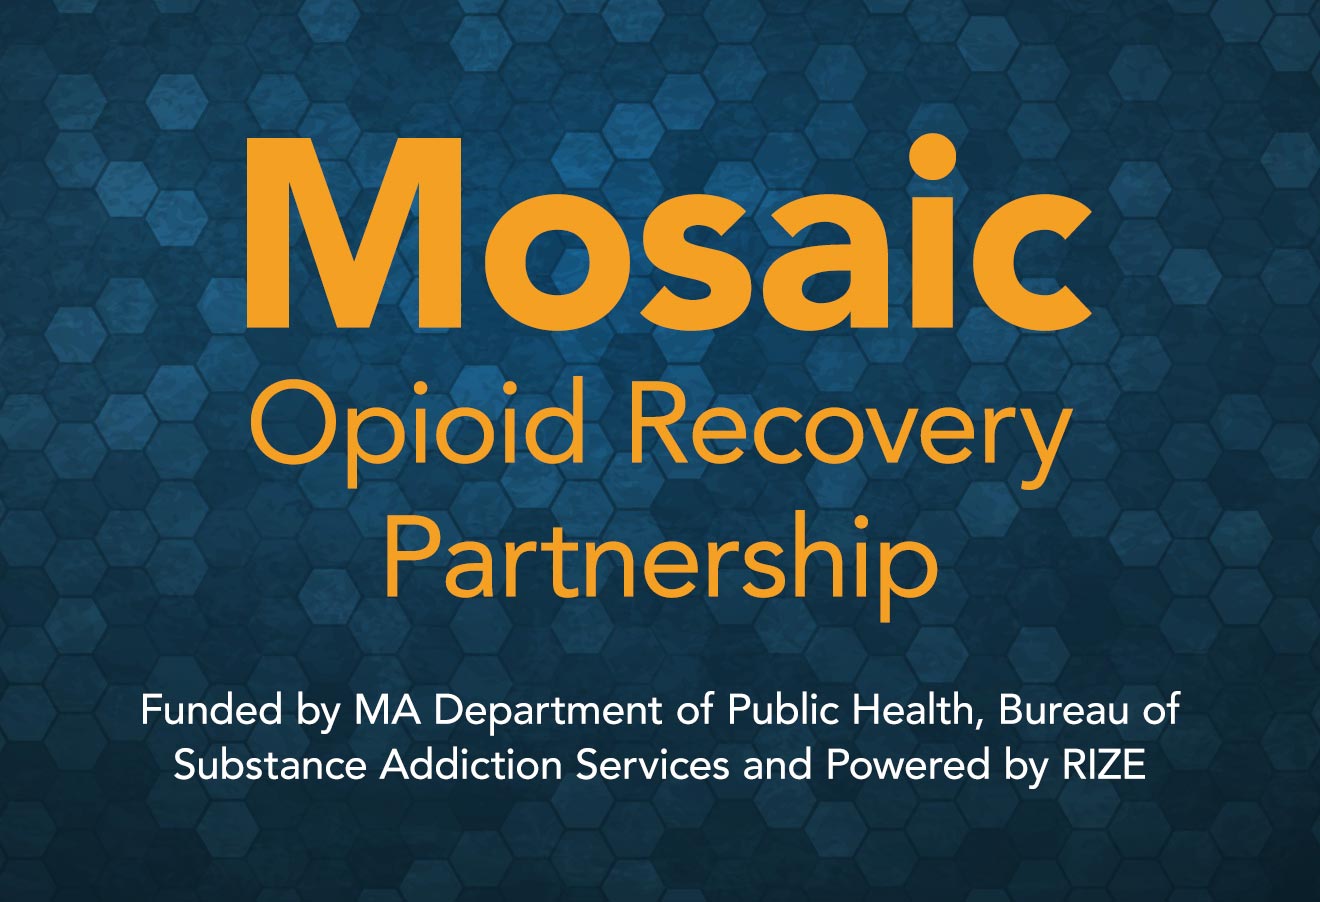 Mosaic Opioid Recovery Partnership - Funded by Funded by MA Department of Public Health Bureau of Substance Addiction Services and Powered by RIZE